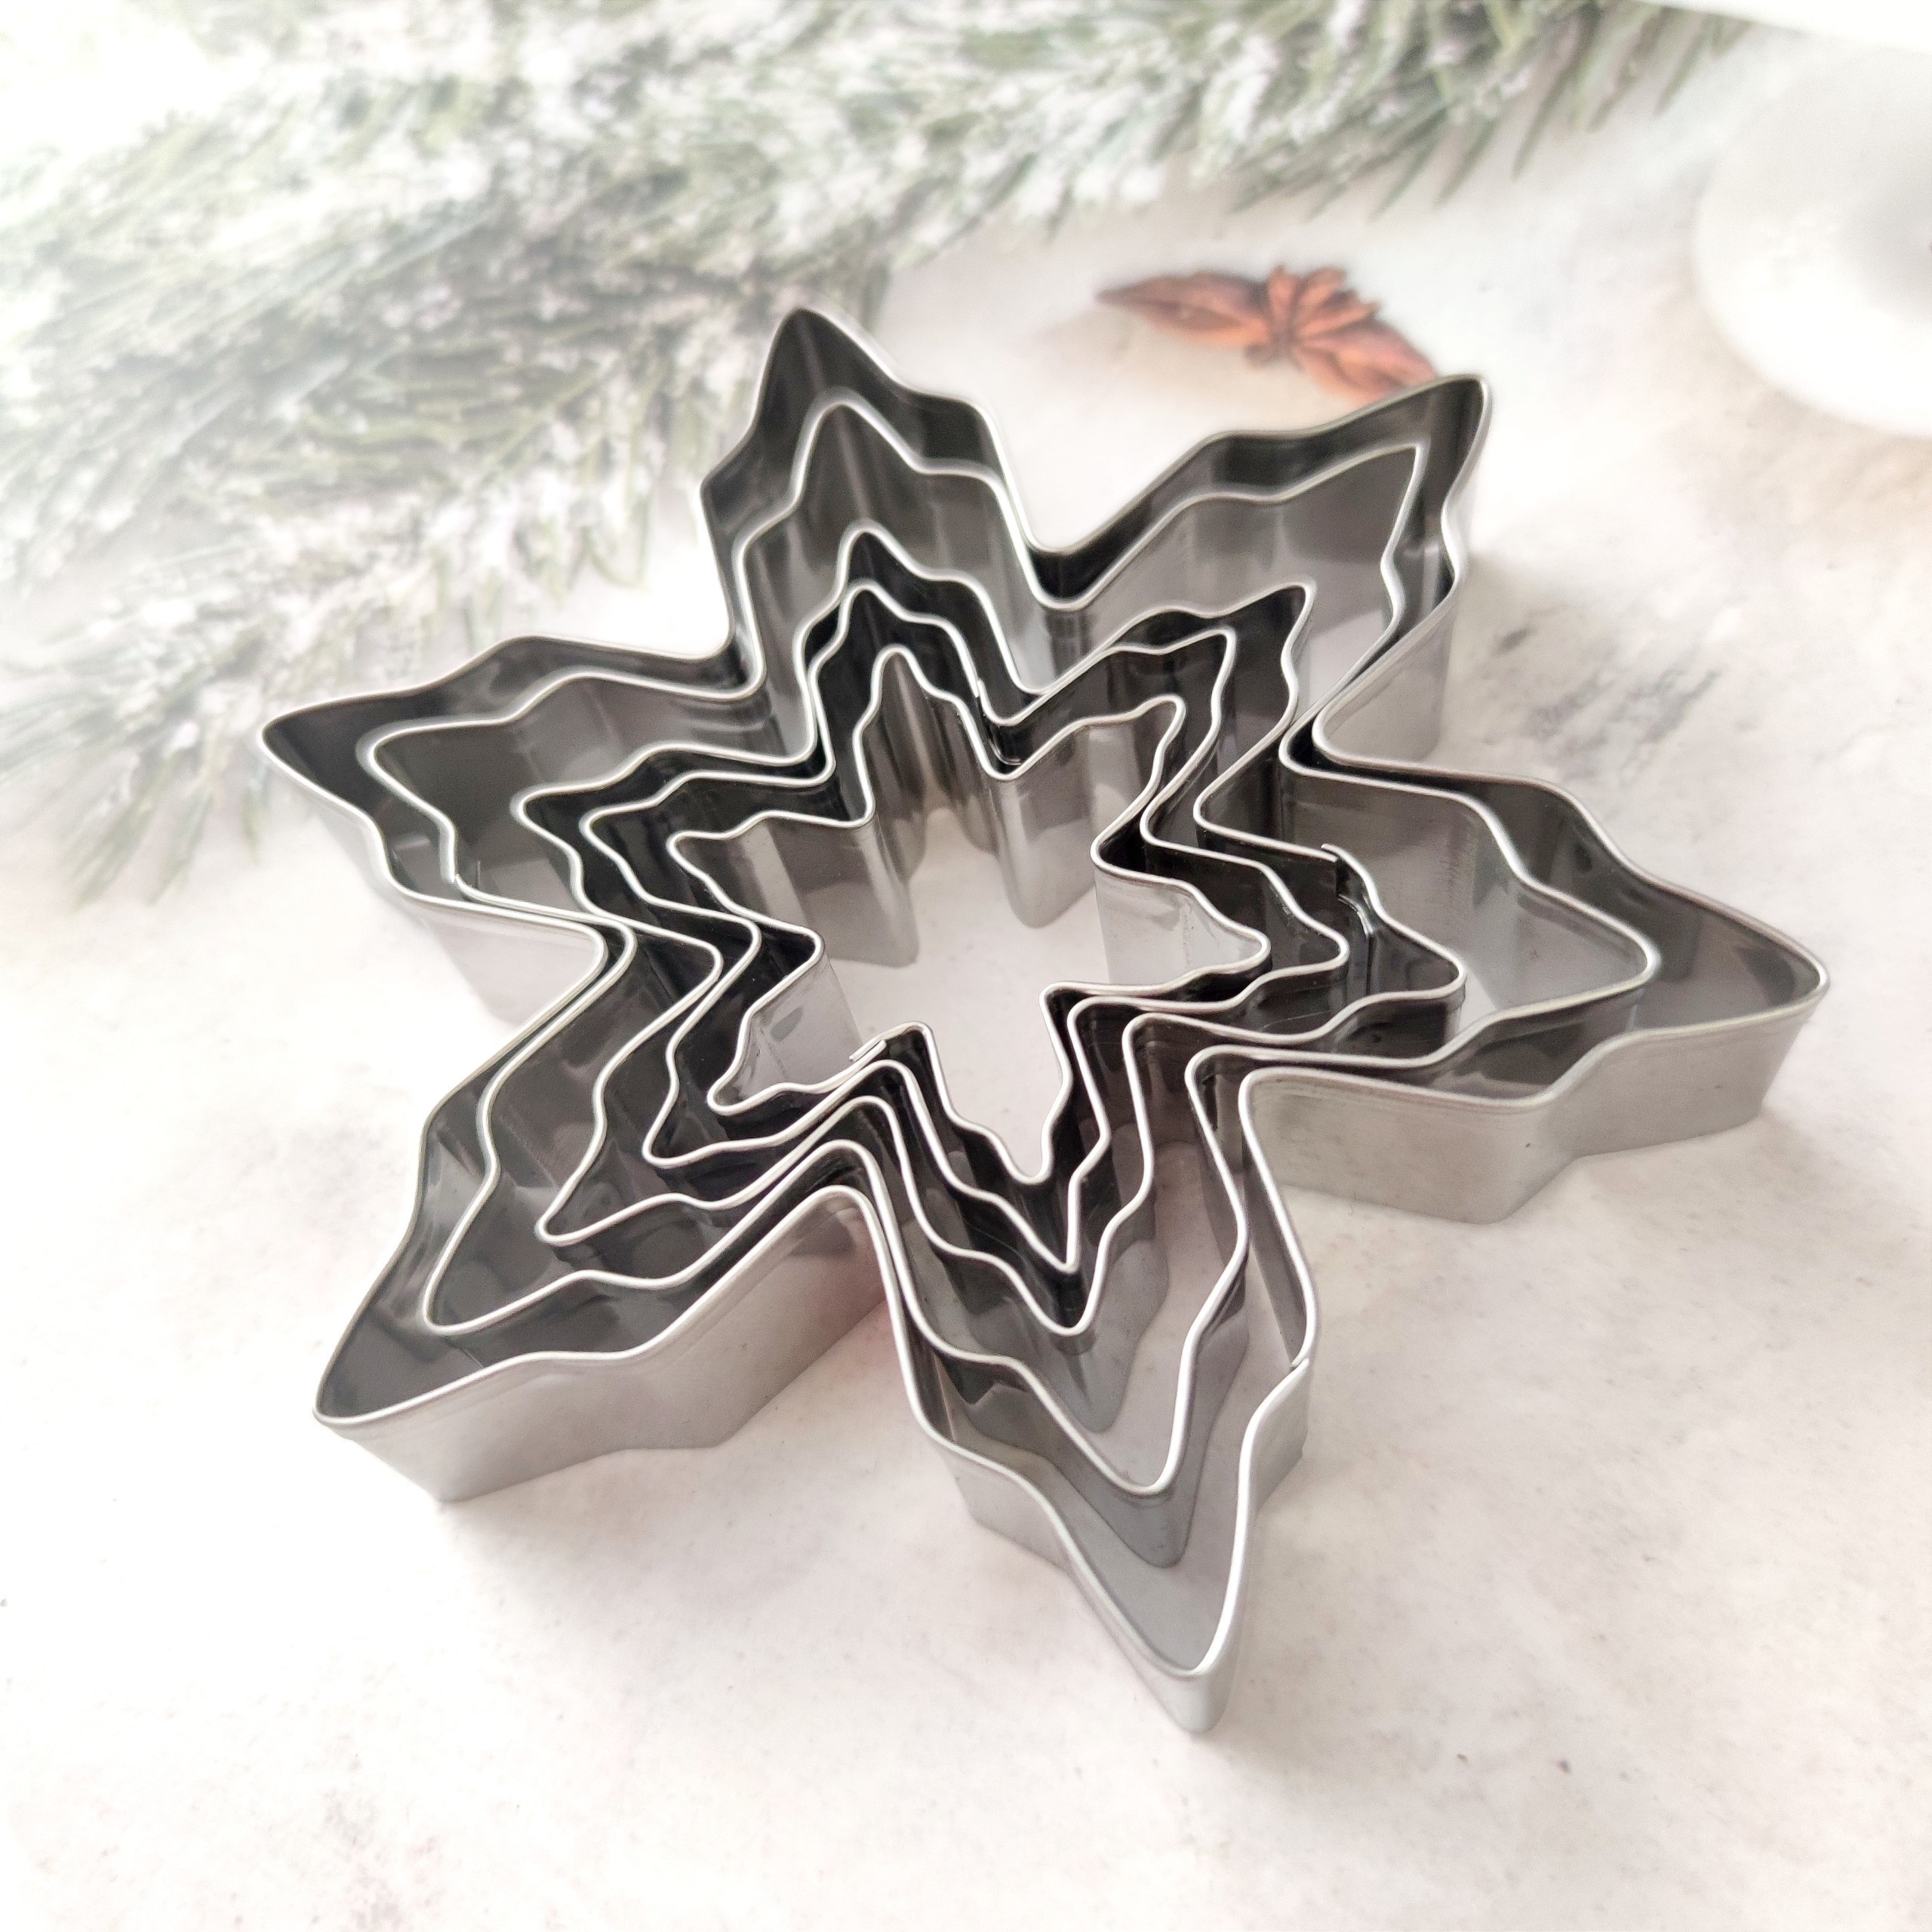 5pcs Stainless Steel Snowflake Cookie Cutter Set, Christmas Series Cookie  Molds, Cookie Baking Supplies, Cookie Fondant Making, Baking Supplies, Kitch